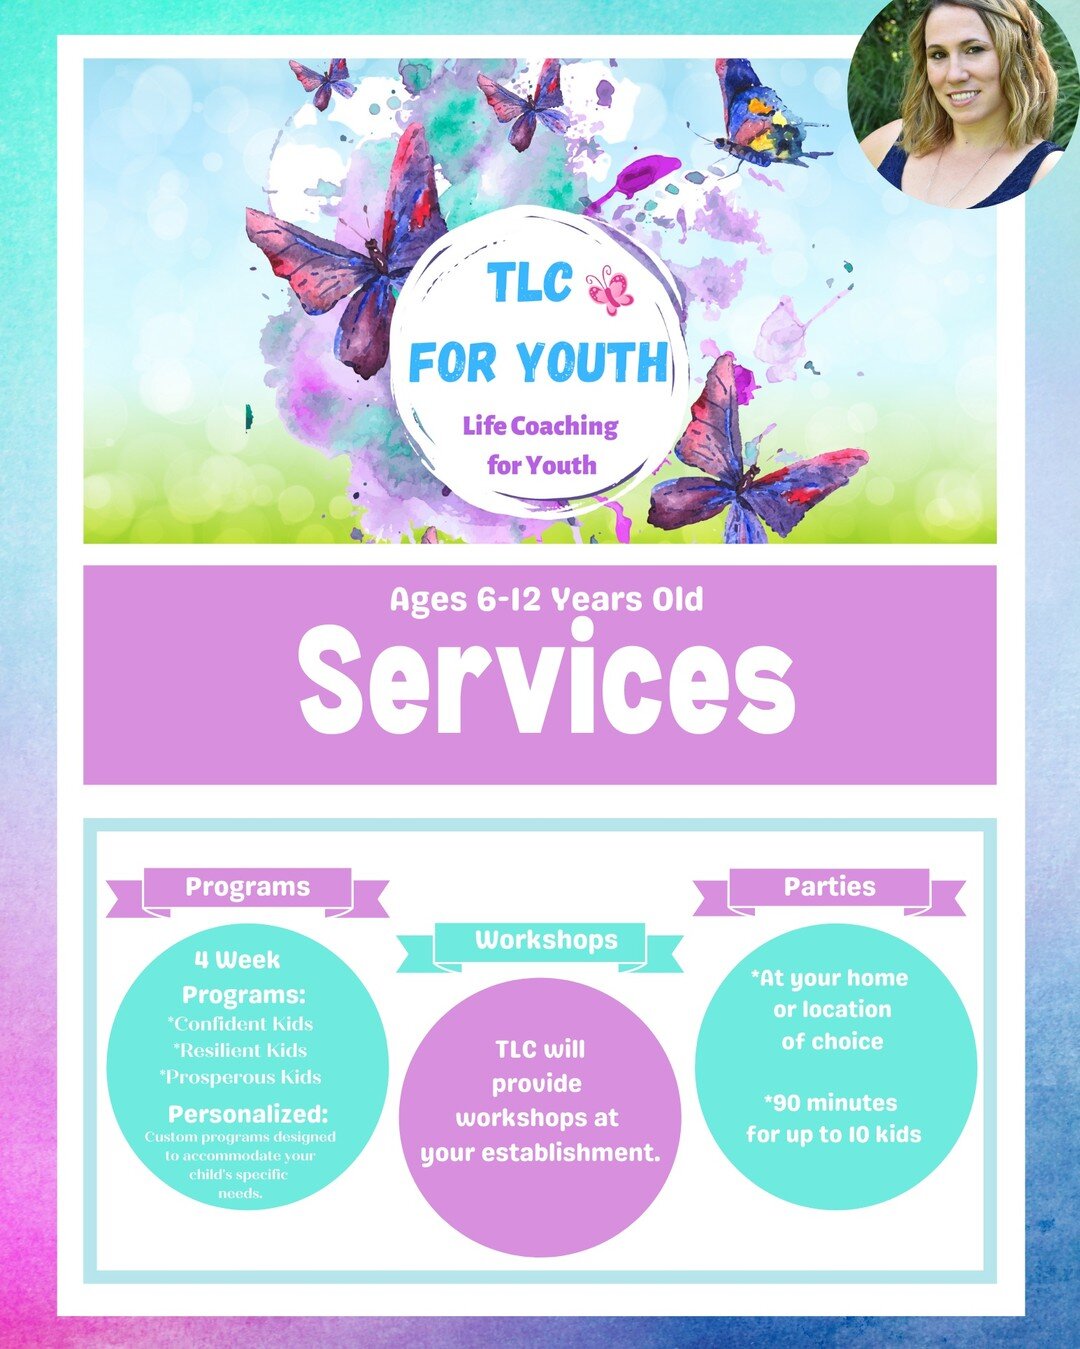 Check out what TLC has to offer!! 👀

🦋Programs: One on One or Group
🦋Workshops: Group
🦋Parties: Group

#tlcforyouth #lifecoachingforyouth #lifecoachingforkids #wisdomcoach #wisdomcoachevents #workshopsforkids #programsforkids #birthdaypartyideas 